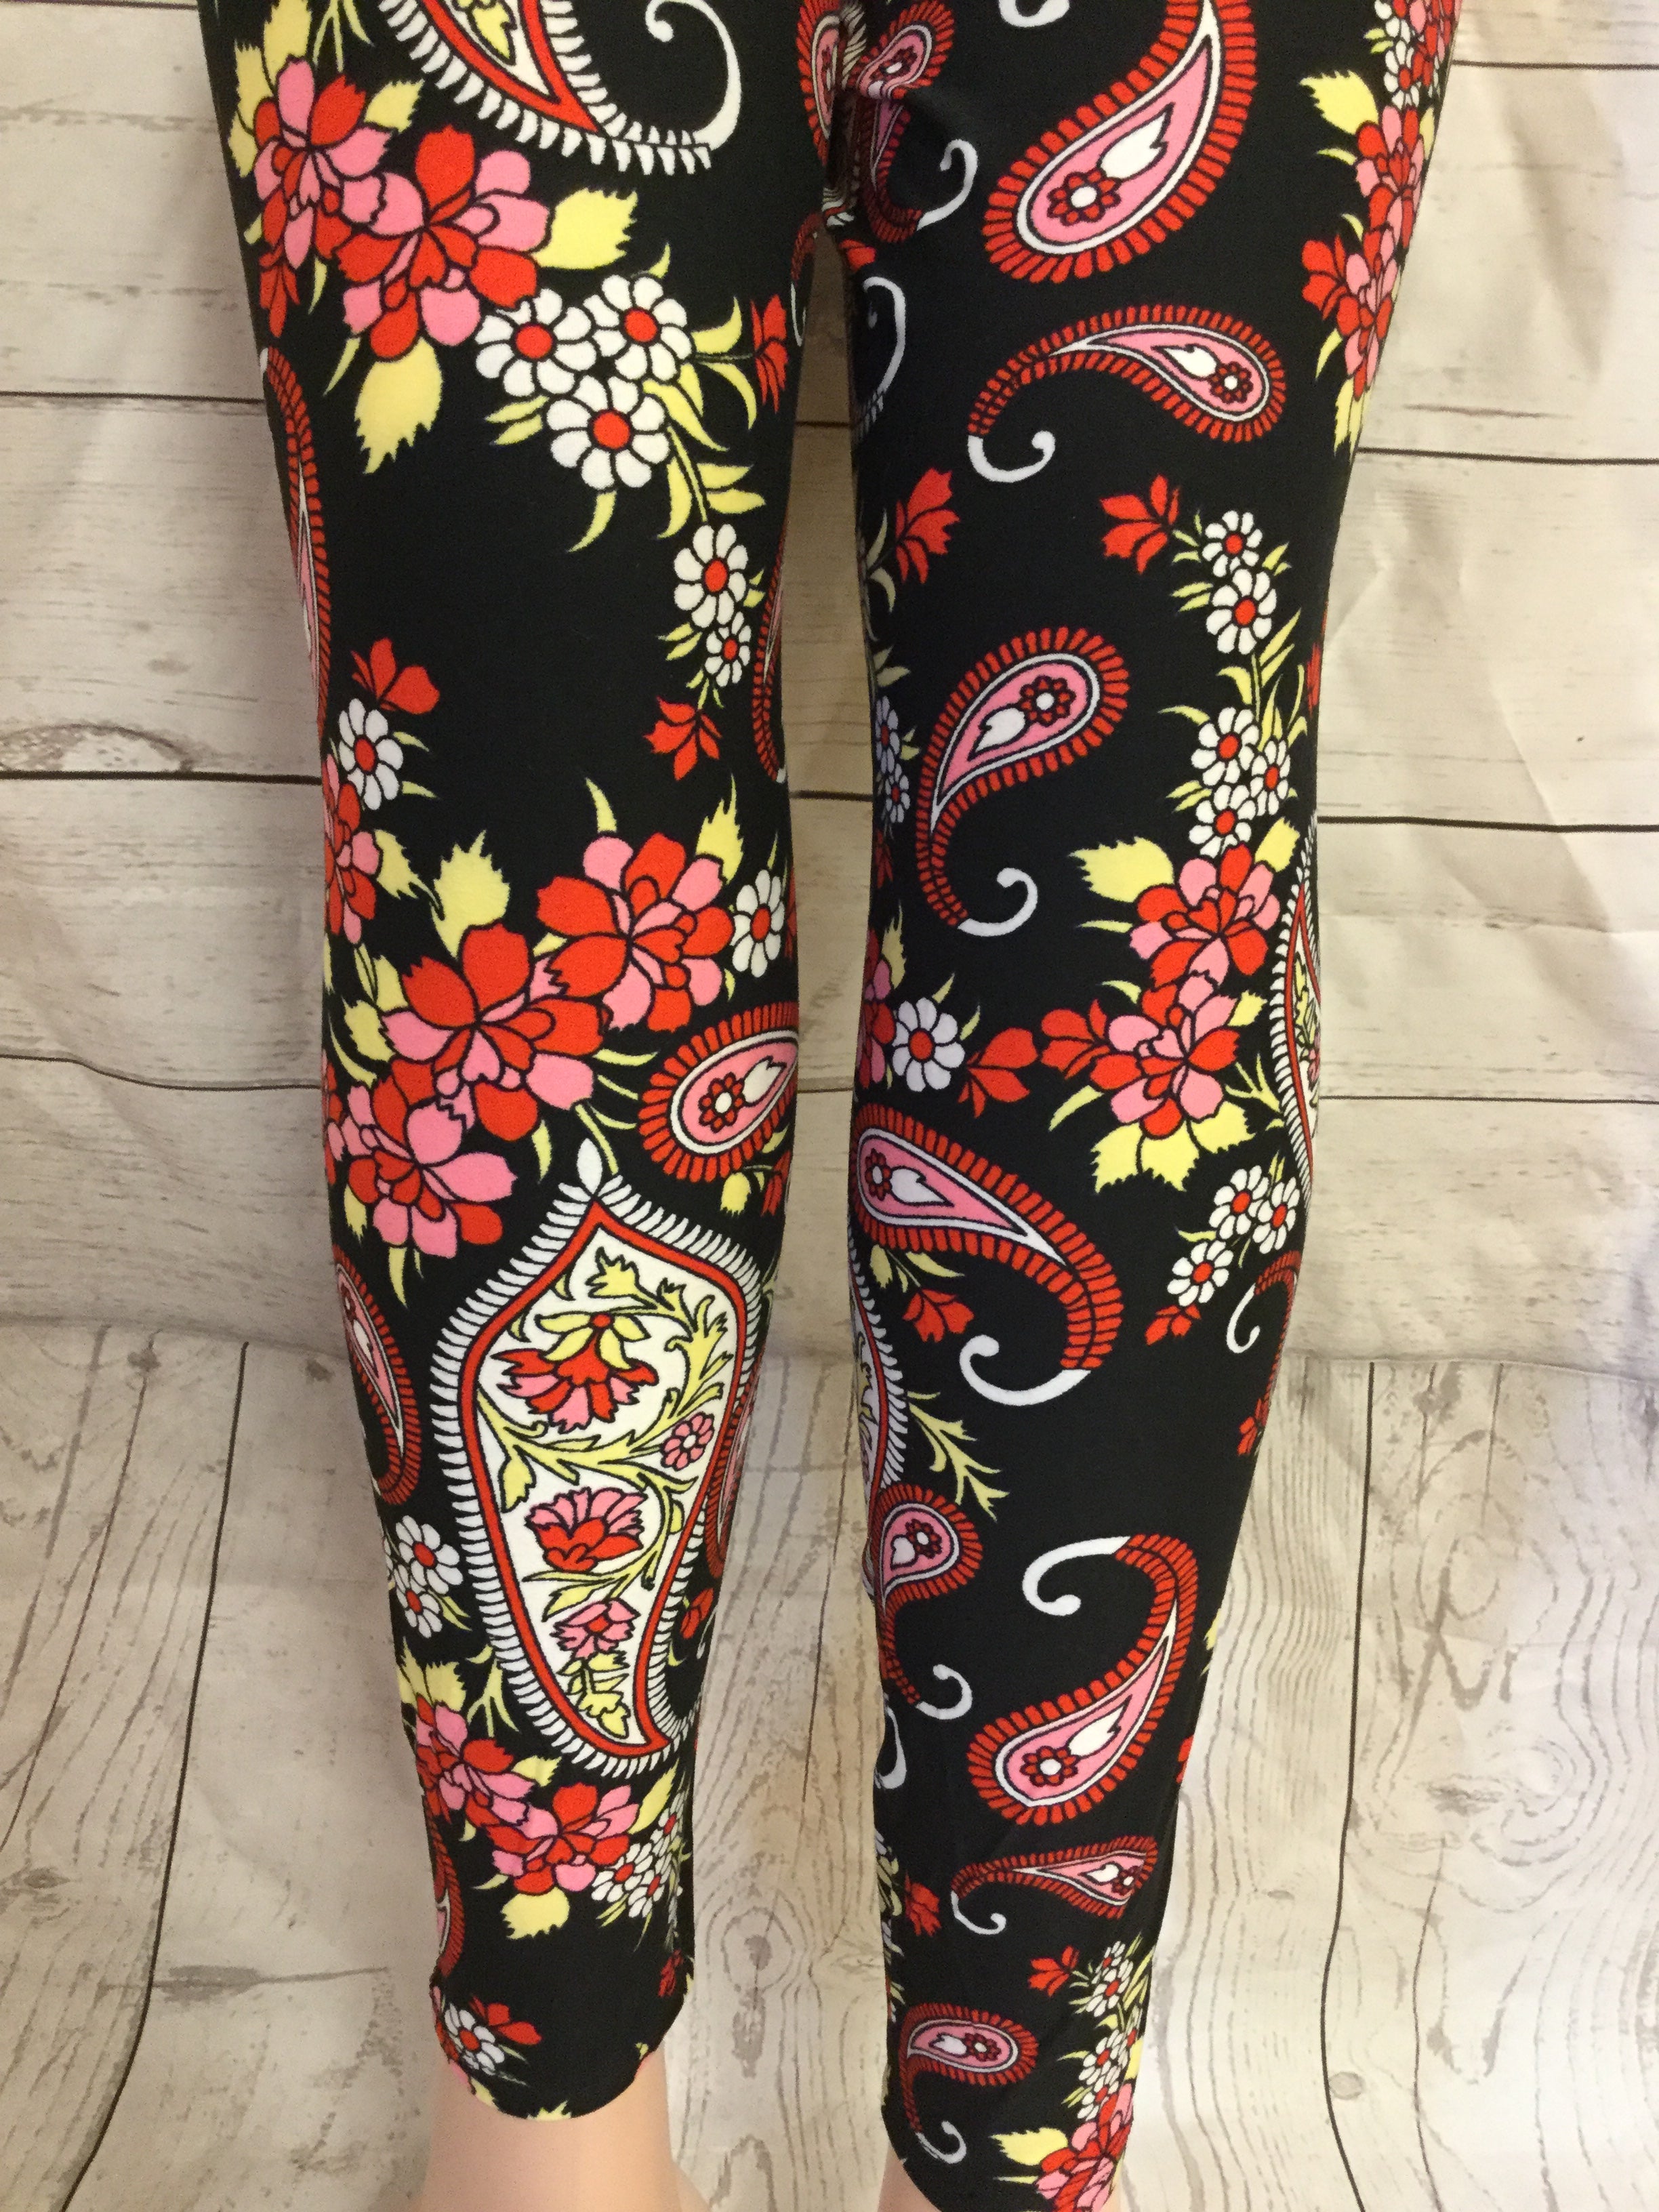 KETKAR Girl's Flower Printed Winter Woollen Velvet Legging|Jegging with  Fleece Inside and Side Two Pockets Multicolour(M3)_Small,Pack of 01 :  Amazon.in: Clothing & Accessories